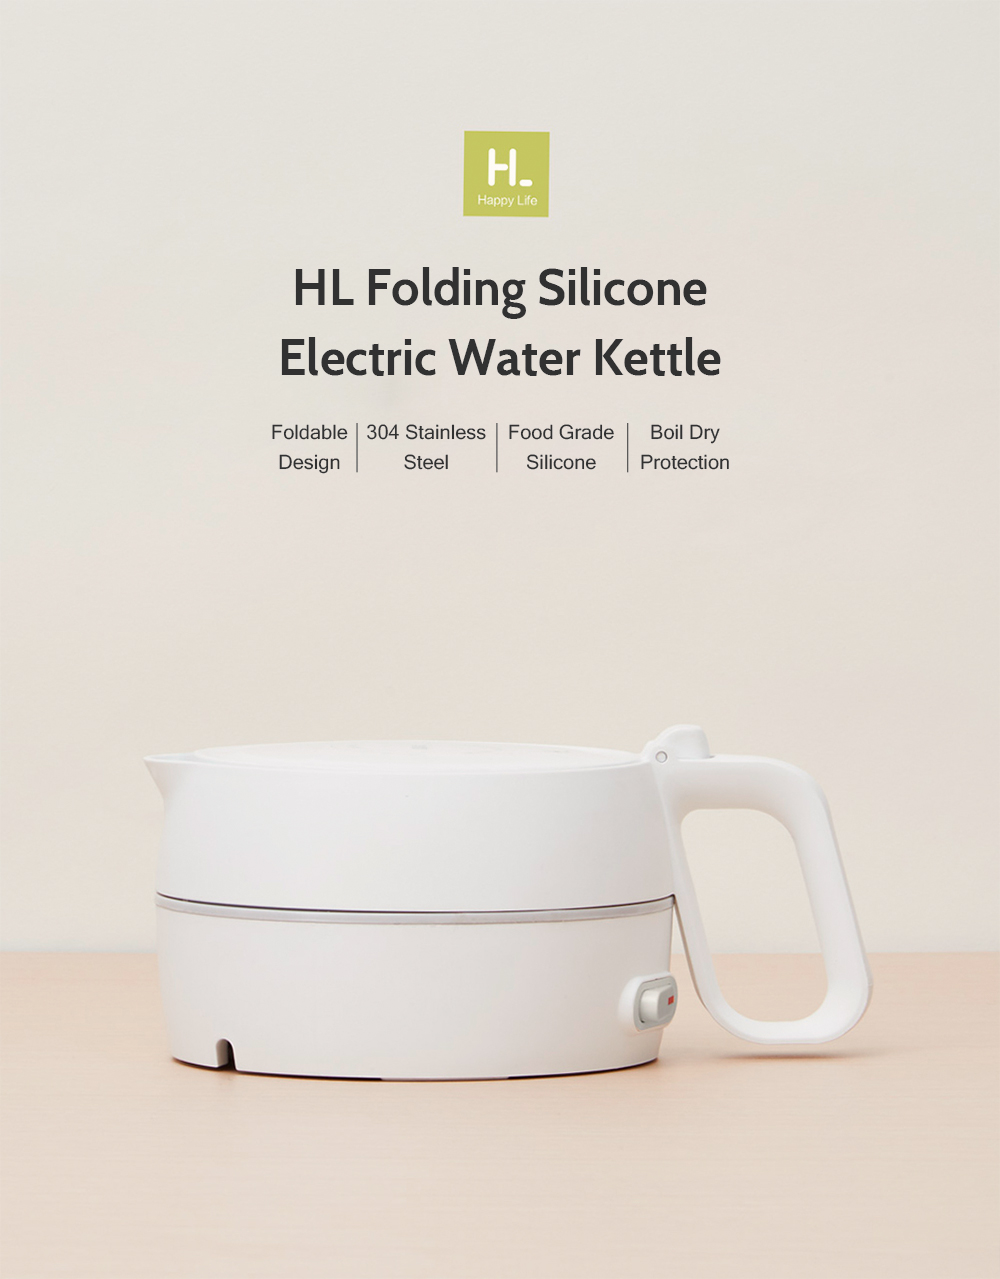 Happy Life HL Folding Electric Kettle Silicone Travel Water Boiler Heating Boil Dry Protection